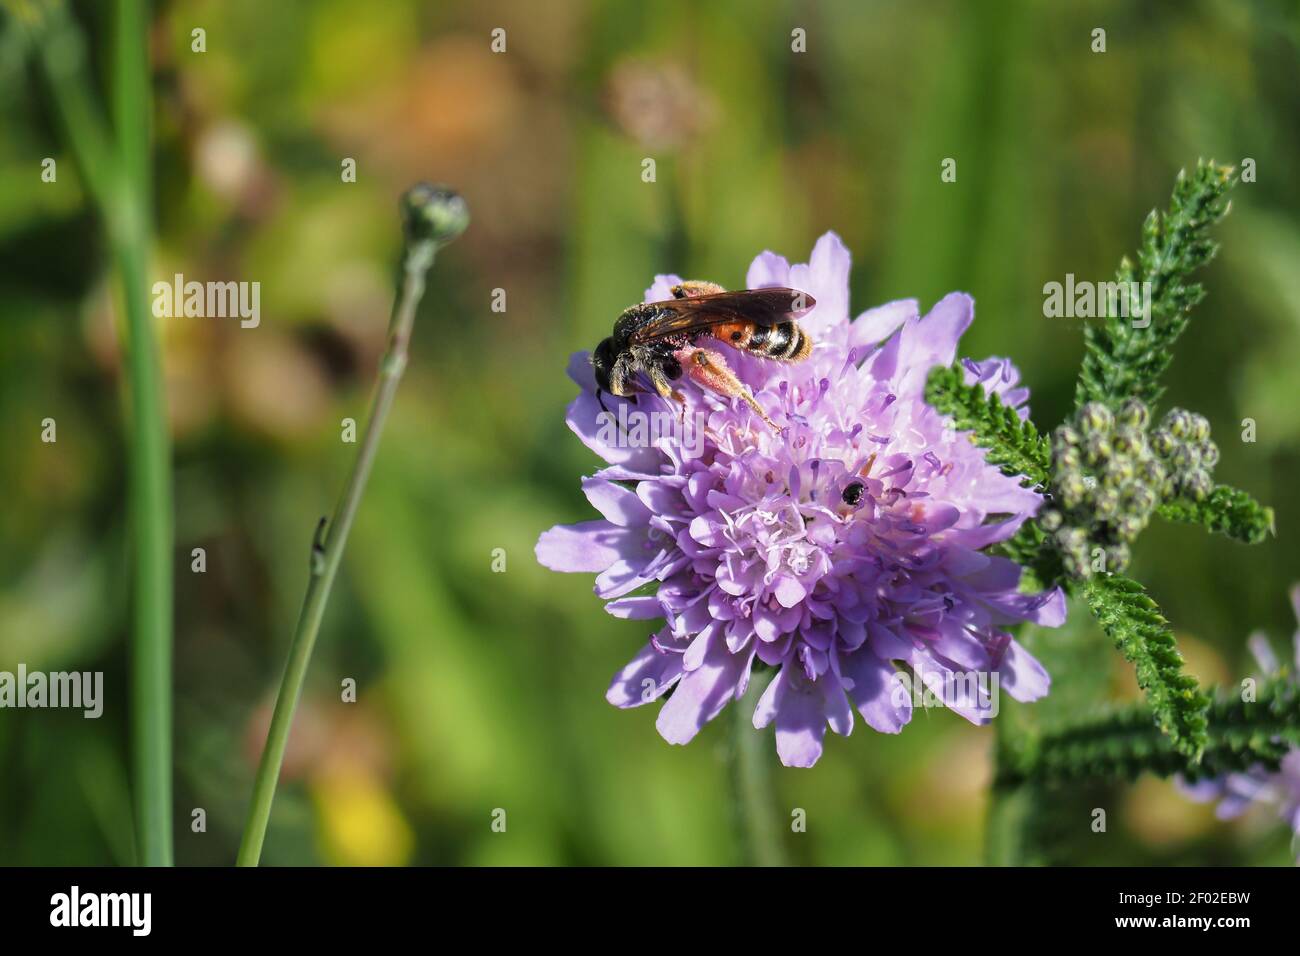 A nice picture of an indefinite bee from central europe , an intresting photo Stock Photo